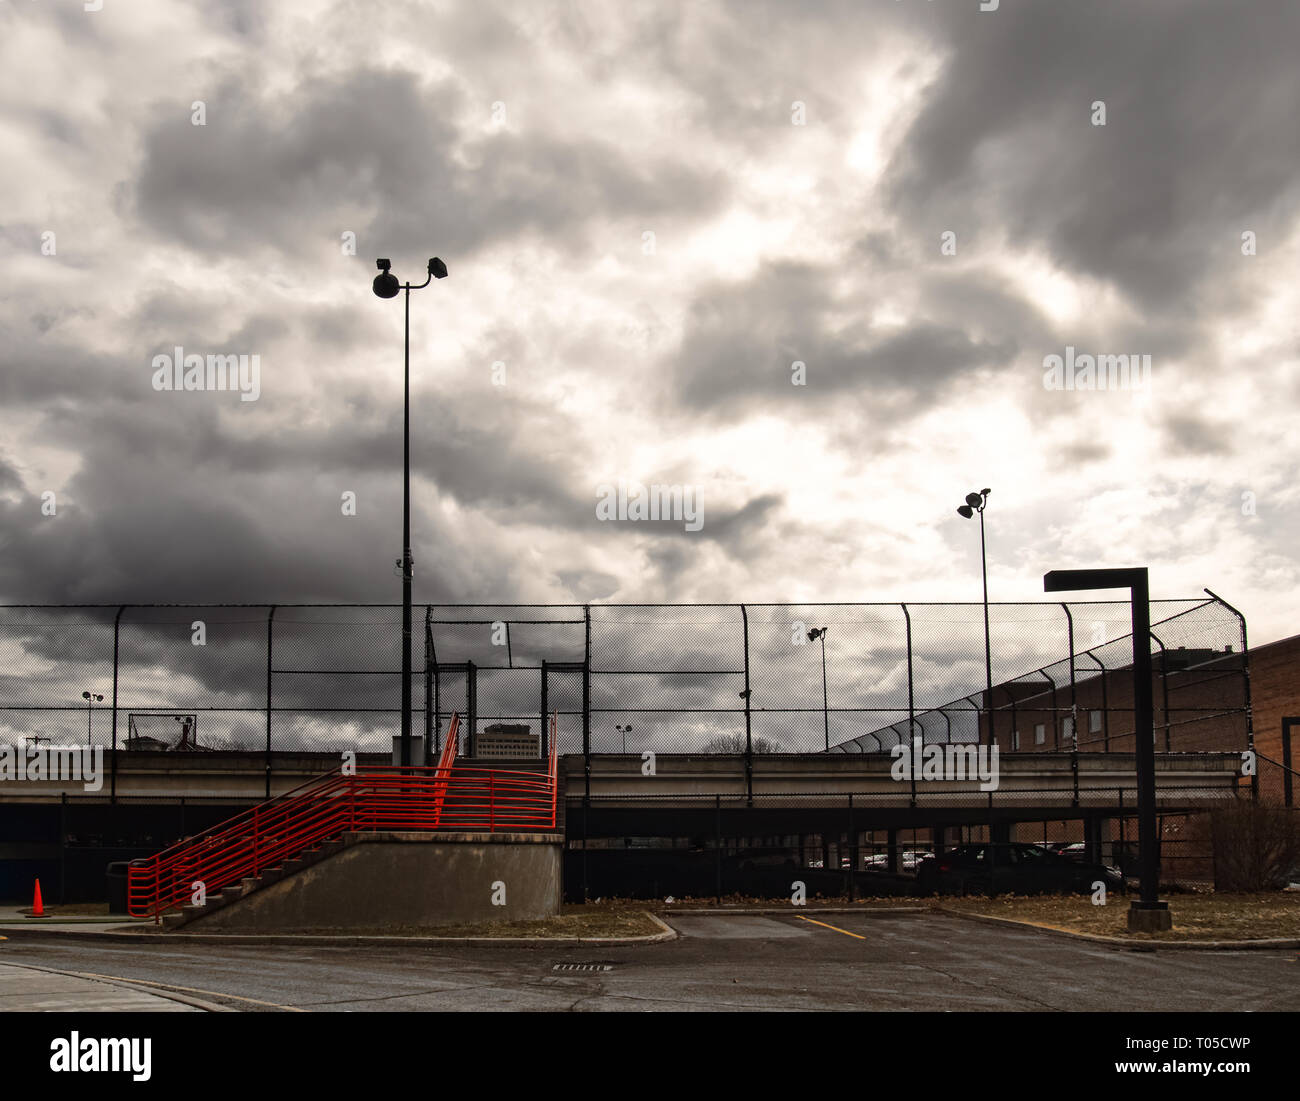 https://c8.alamy.com/comp/T05CWP/empty-elevated-sports-field-on-an-overcast-winter-morning-T05CWP.jpg